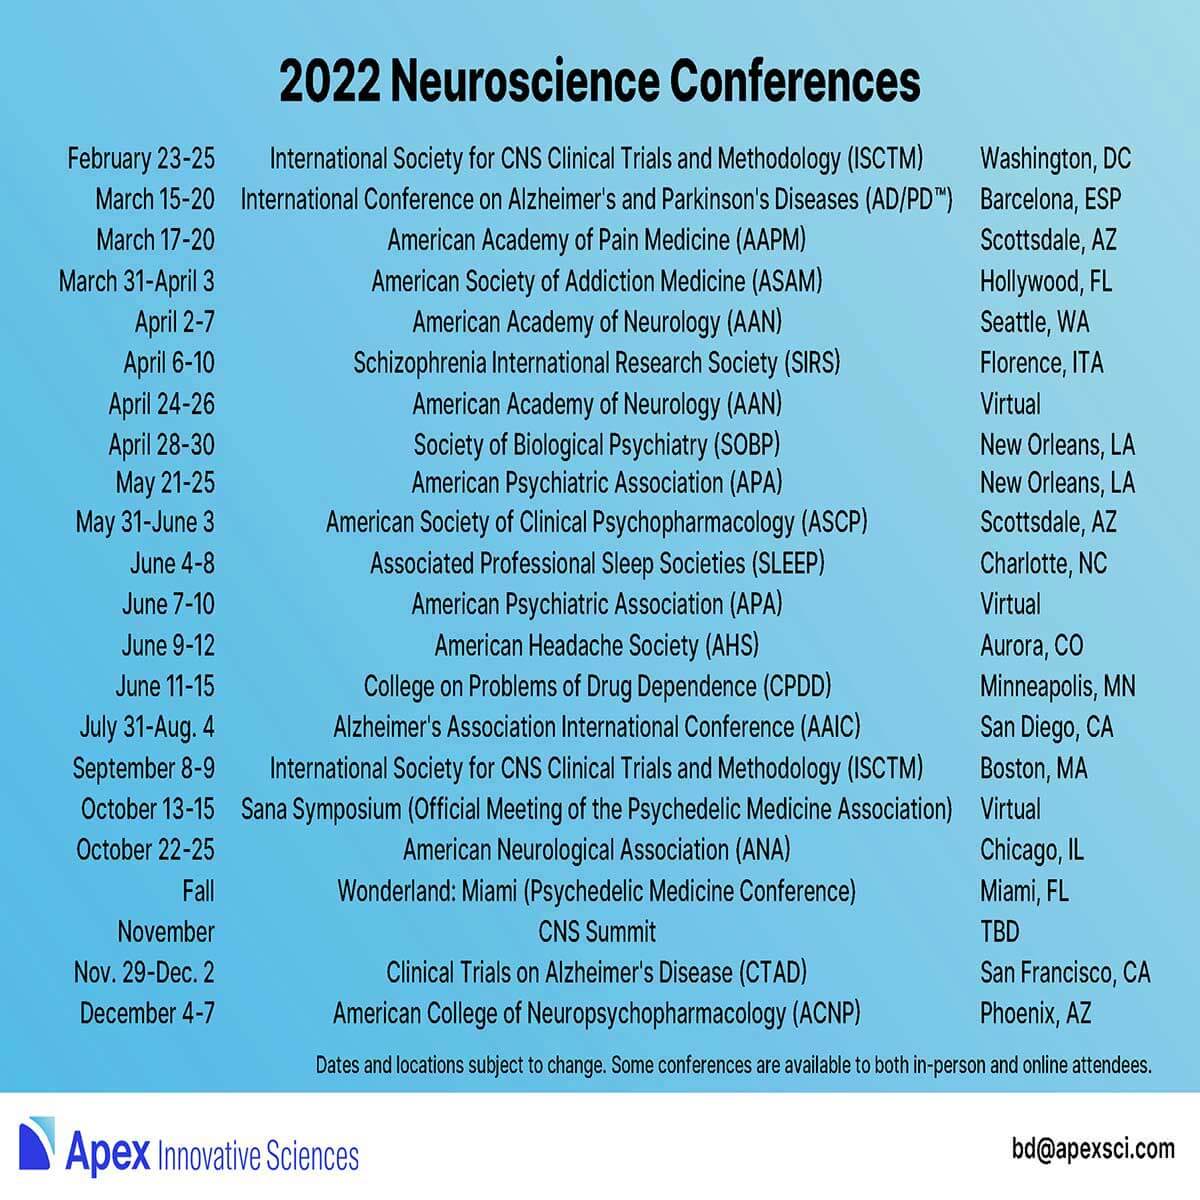 Apex_Conference-Card-2022_Neuroscience-new